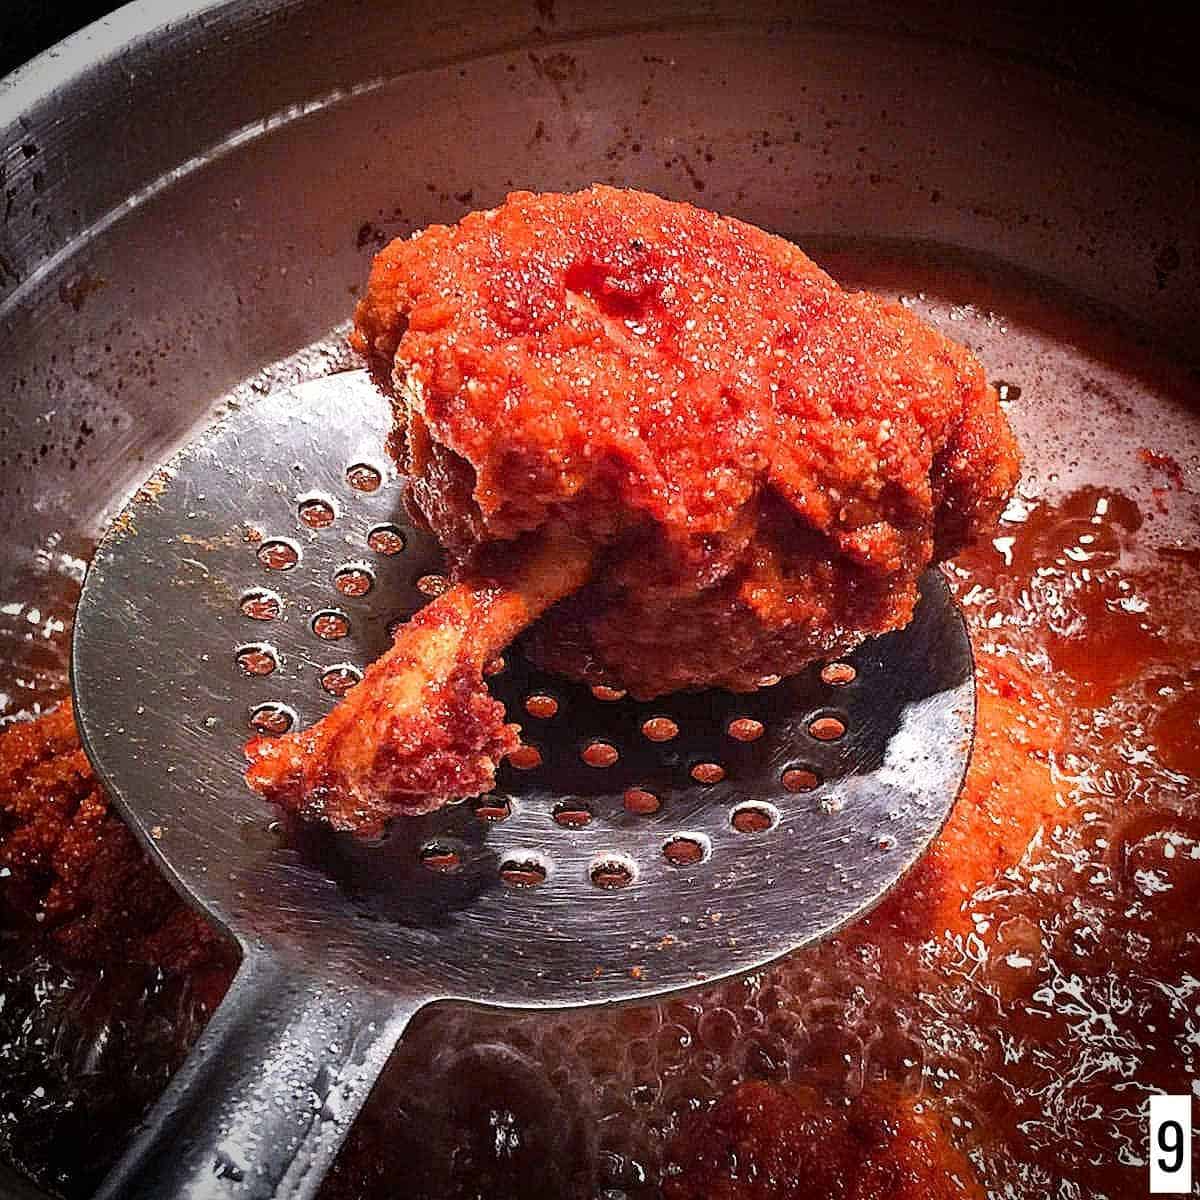 Deep fried chicken lollipop placed on the strainer.